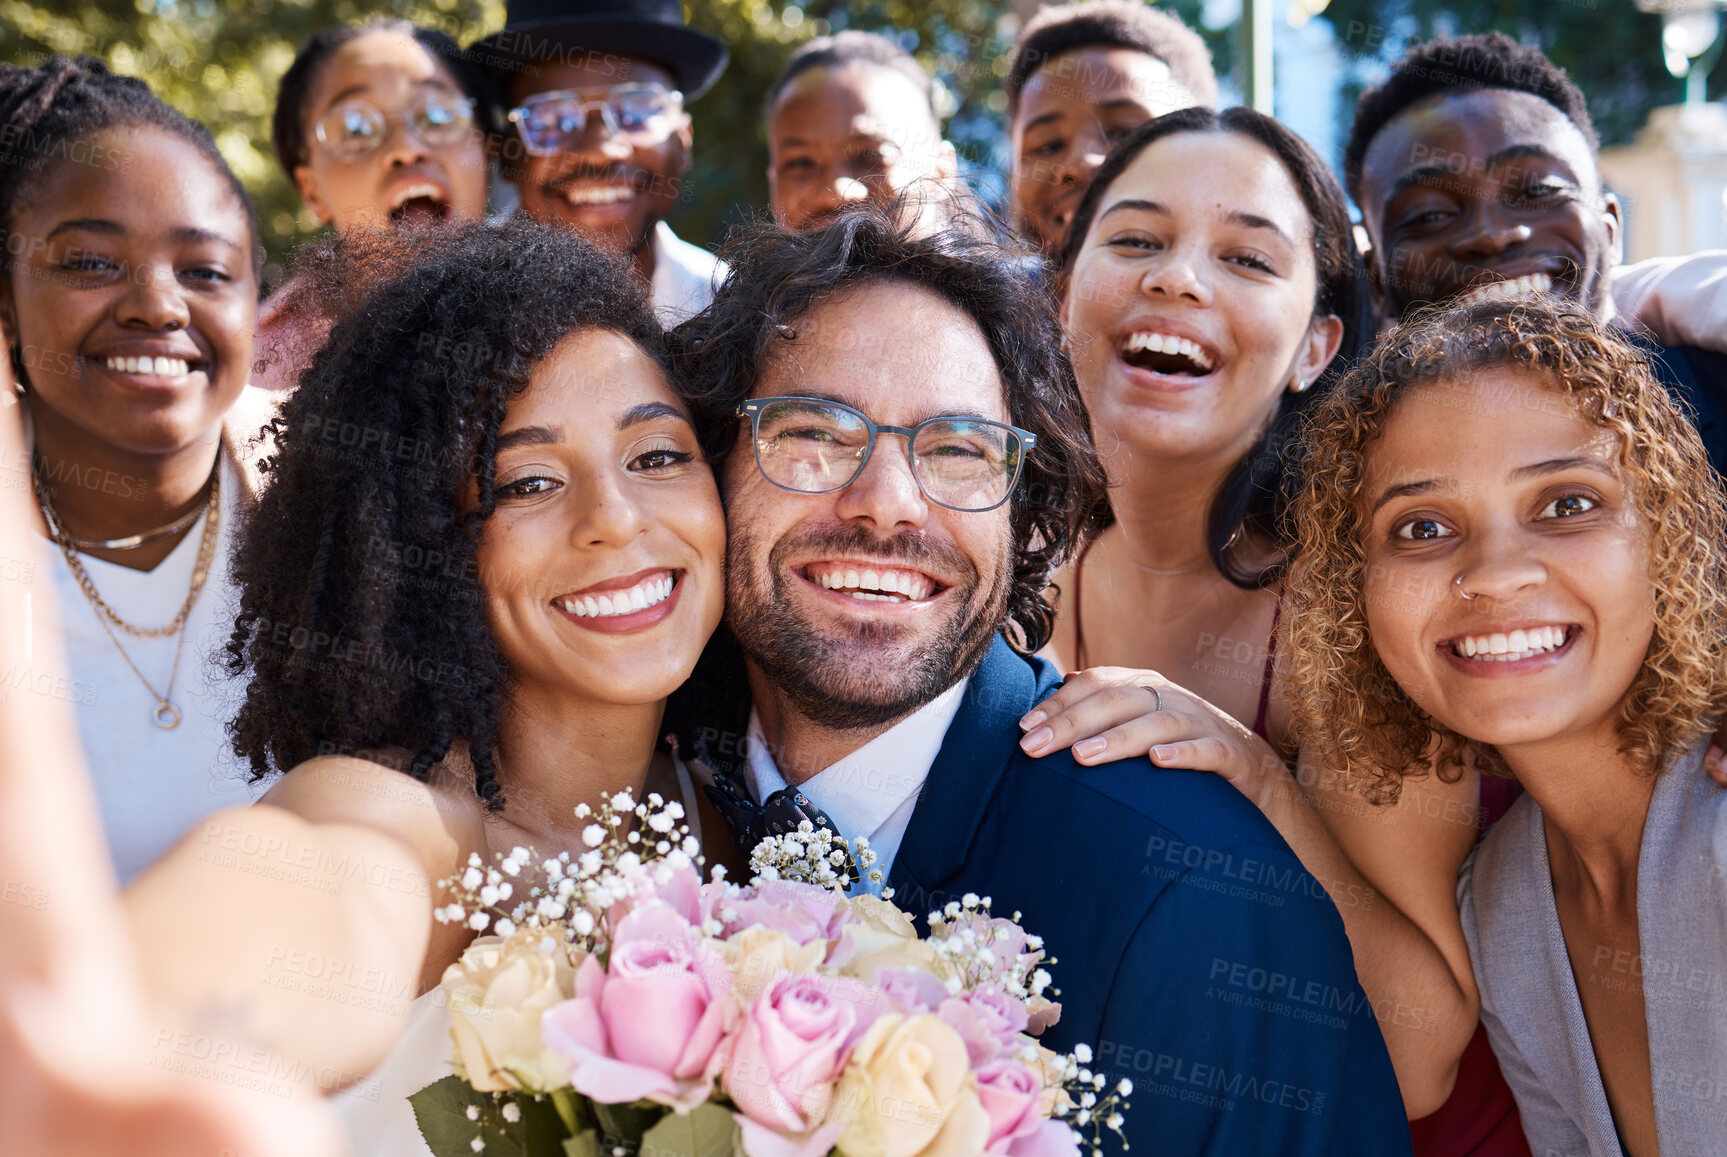 Buy stock photo Wedding, selfie and happy friends and family celebrating love of groom and bride at a ceremony or event. Group, portrait and excited smiling people taking picture or photo with newlyweds outdoors